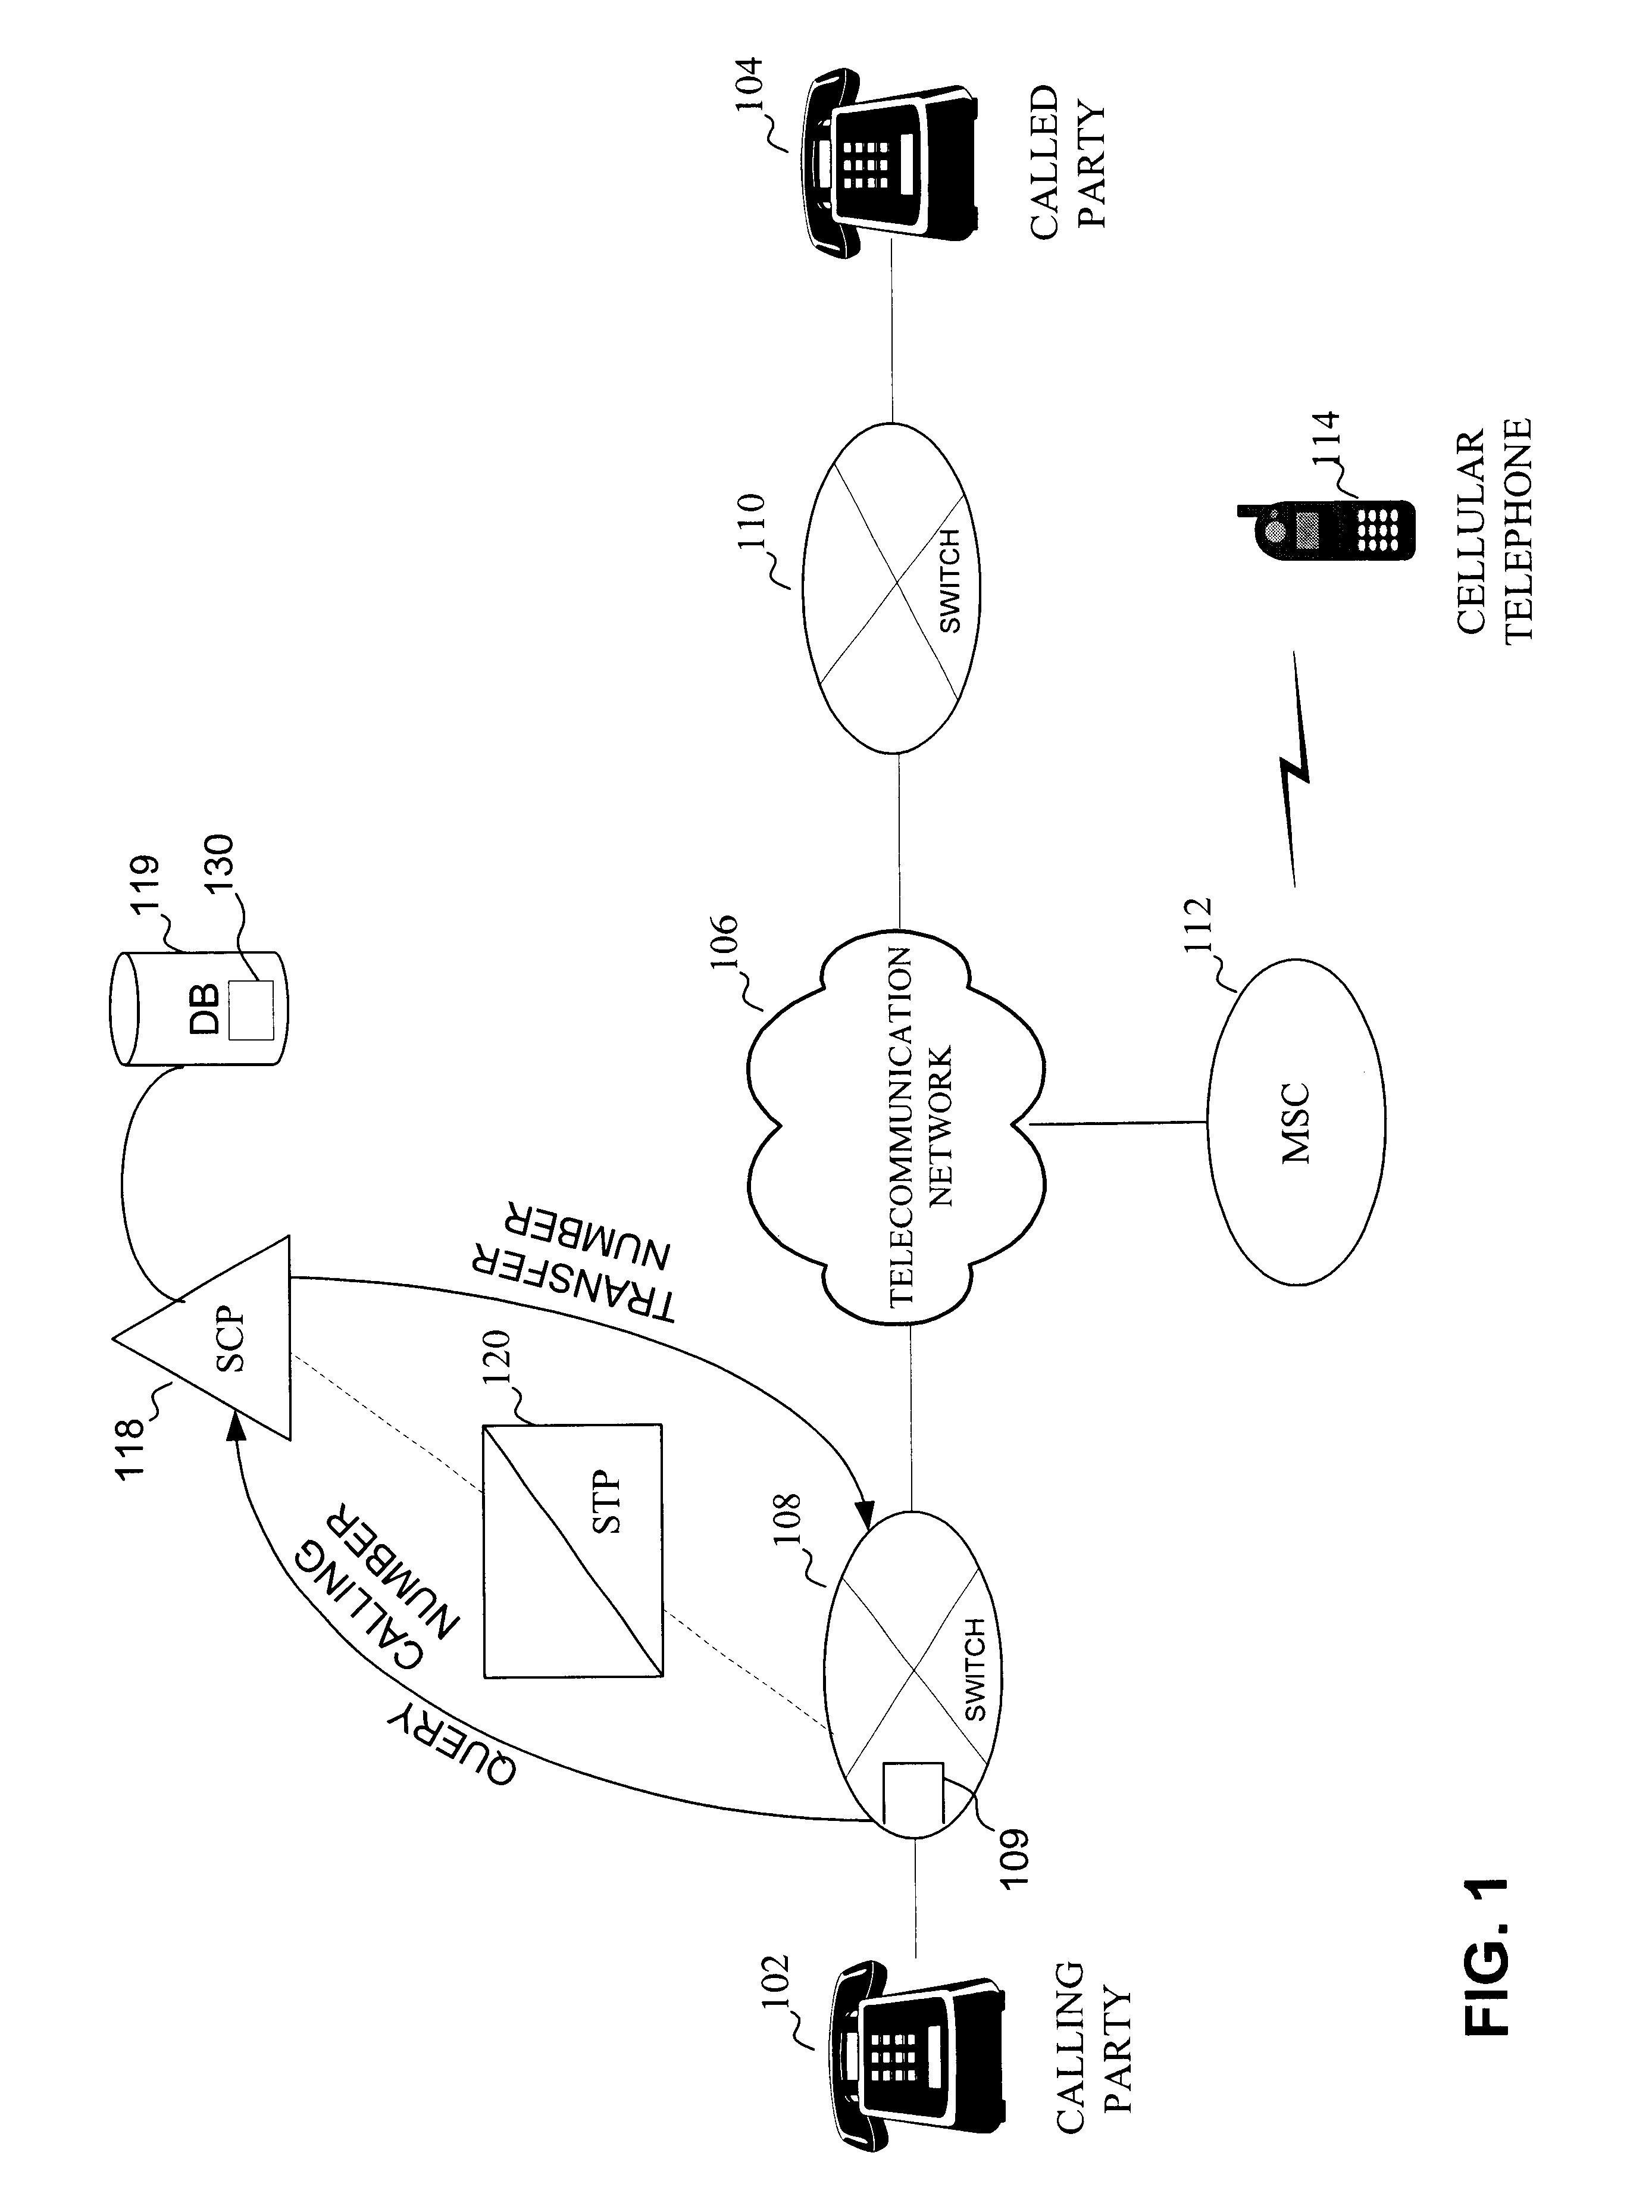 System and method for efficient telephone call transfer